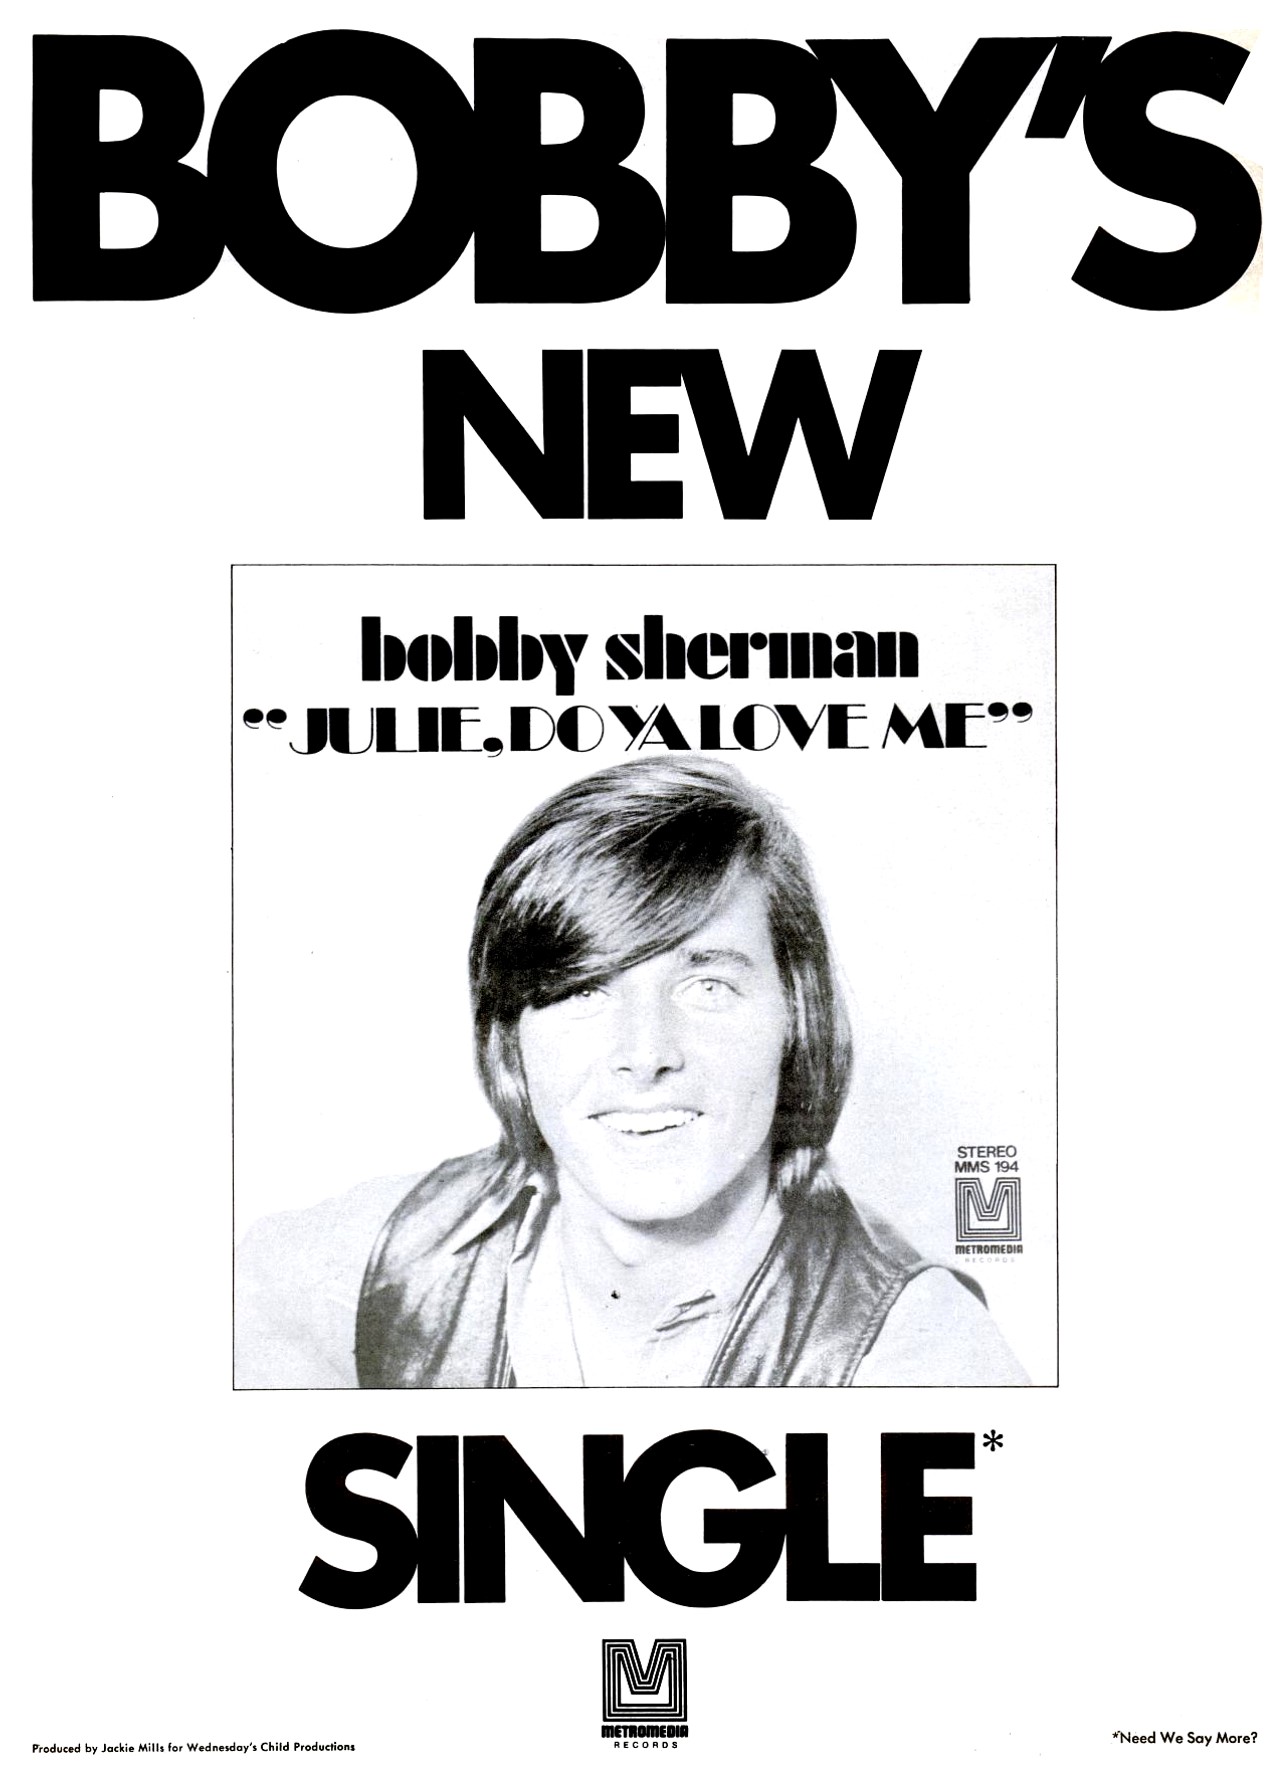 Pictures of bobby sherman